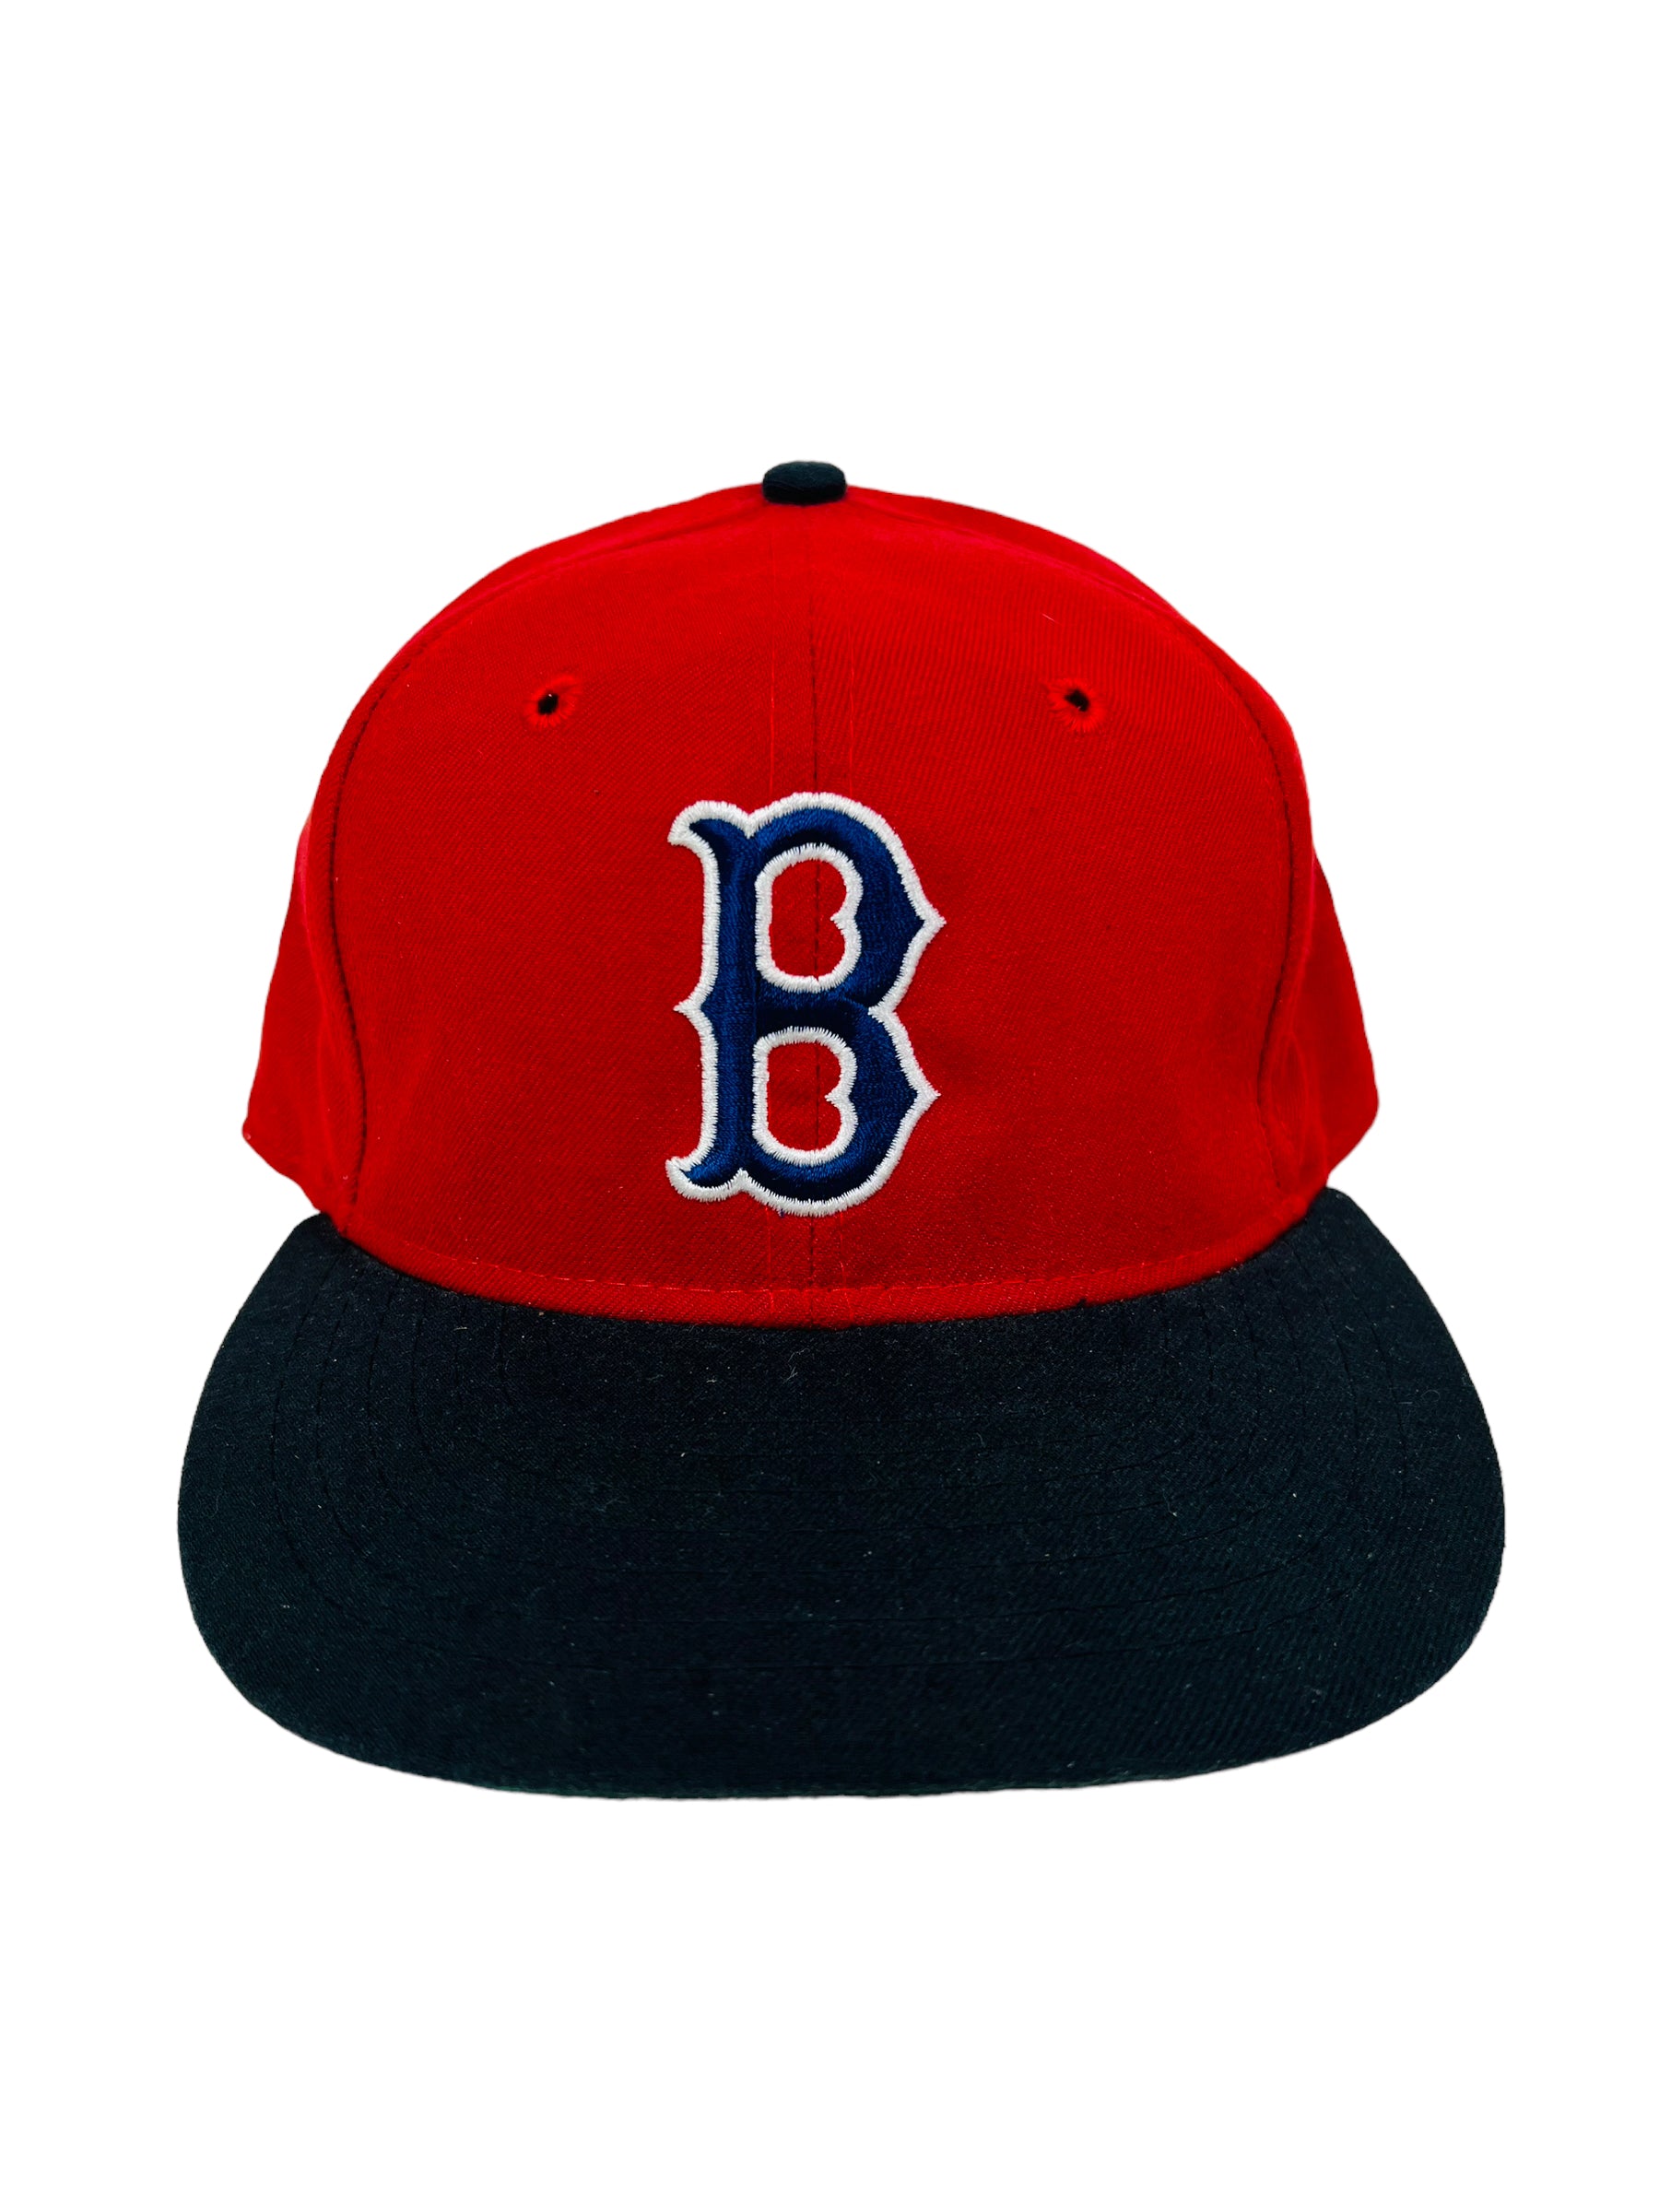 Boston Red Sox Fitted Hats, Red Sox Hats